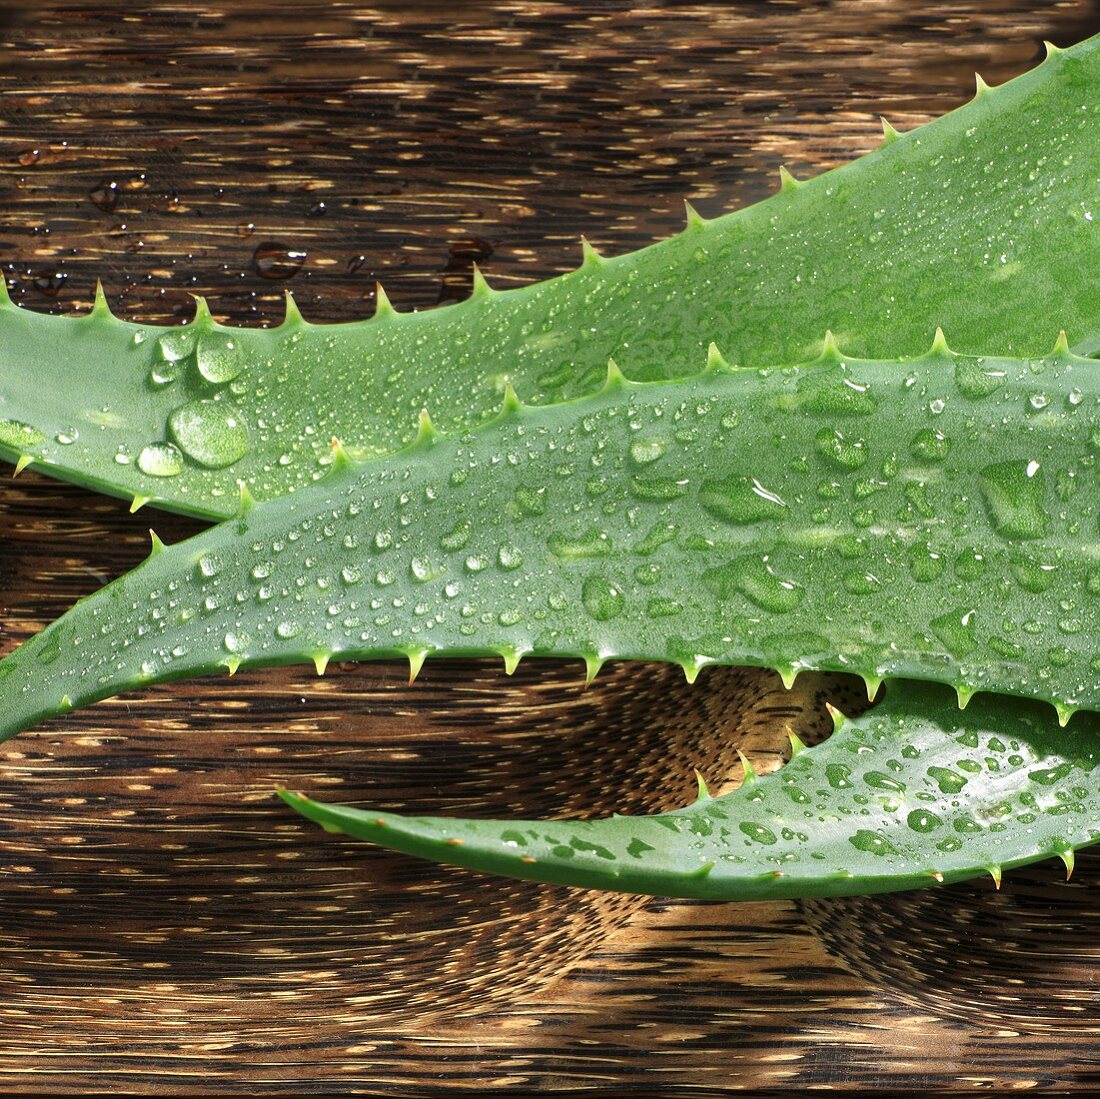 Aloe vera leaves with drops of water in wooden dish